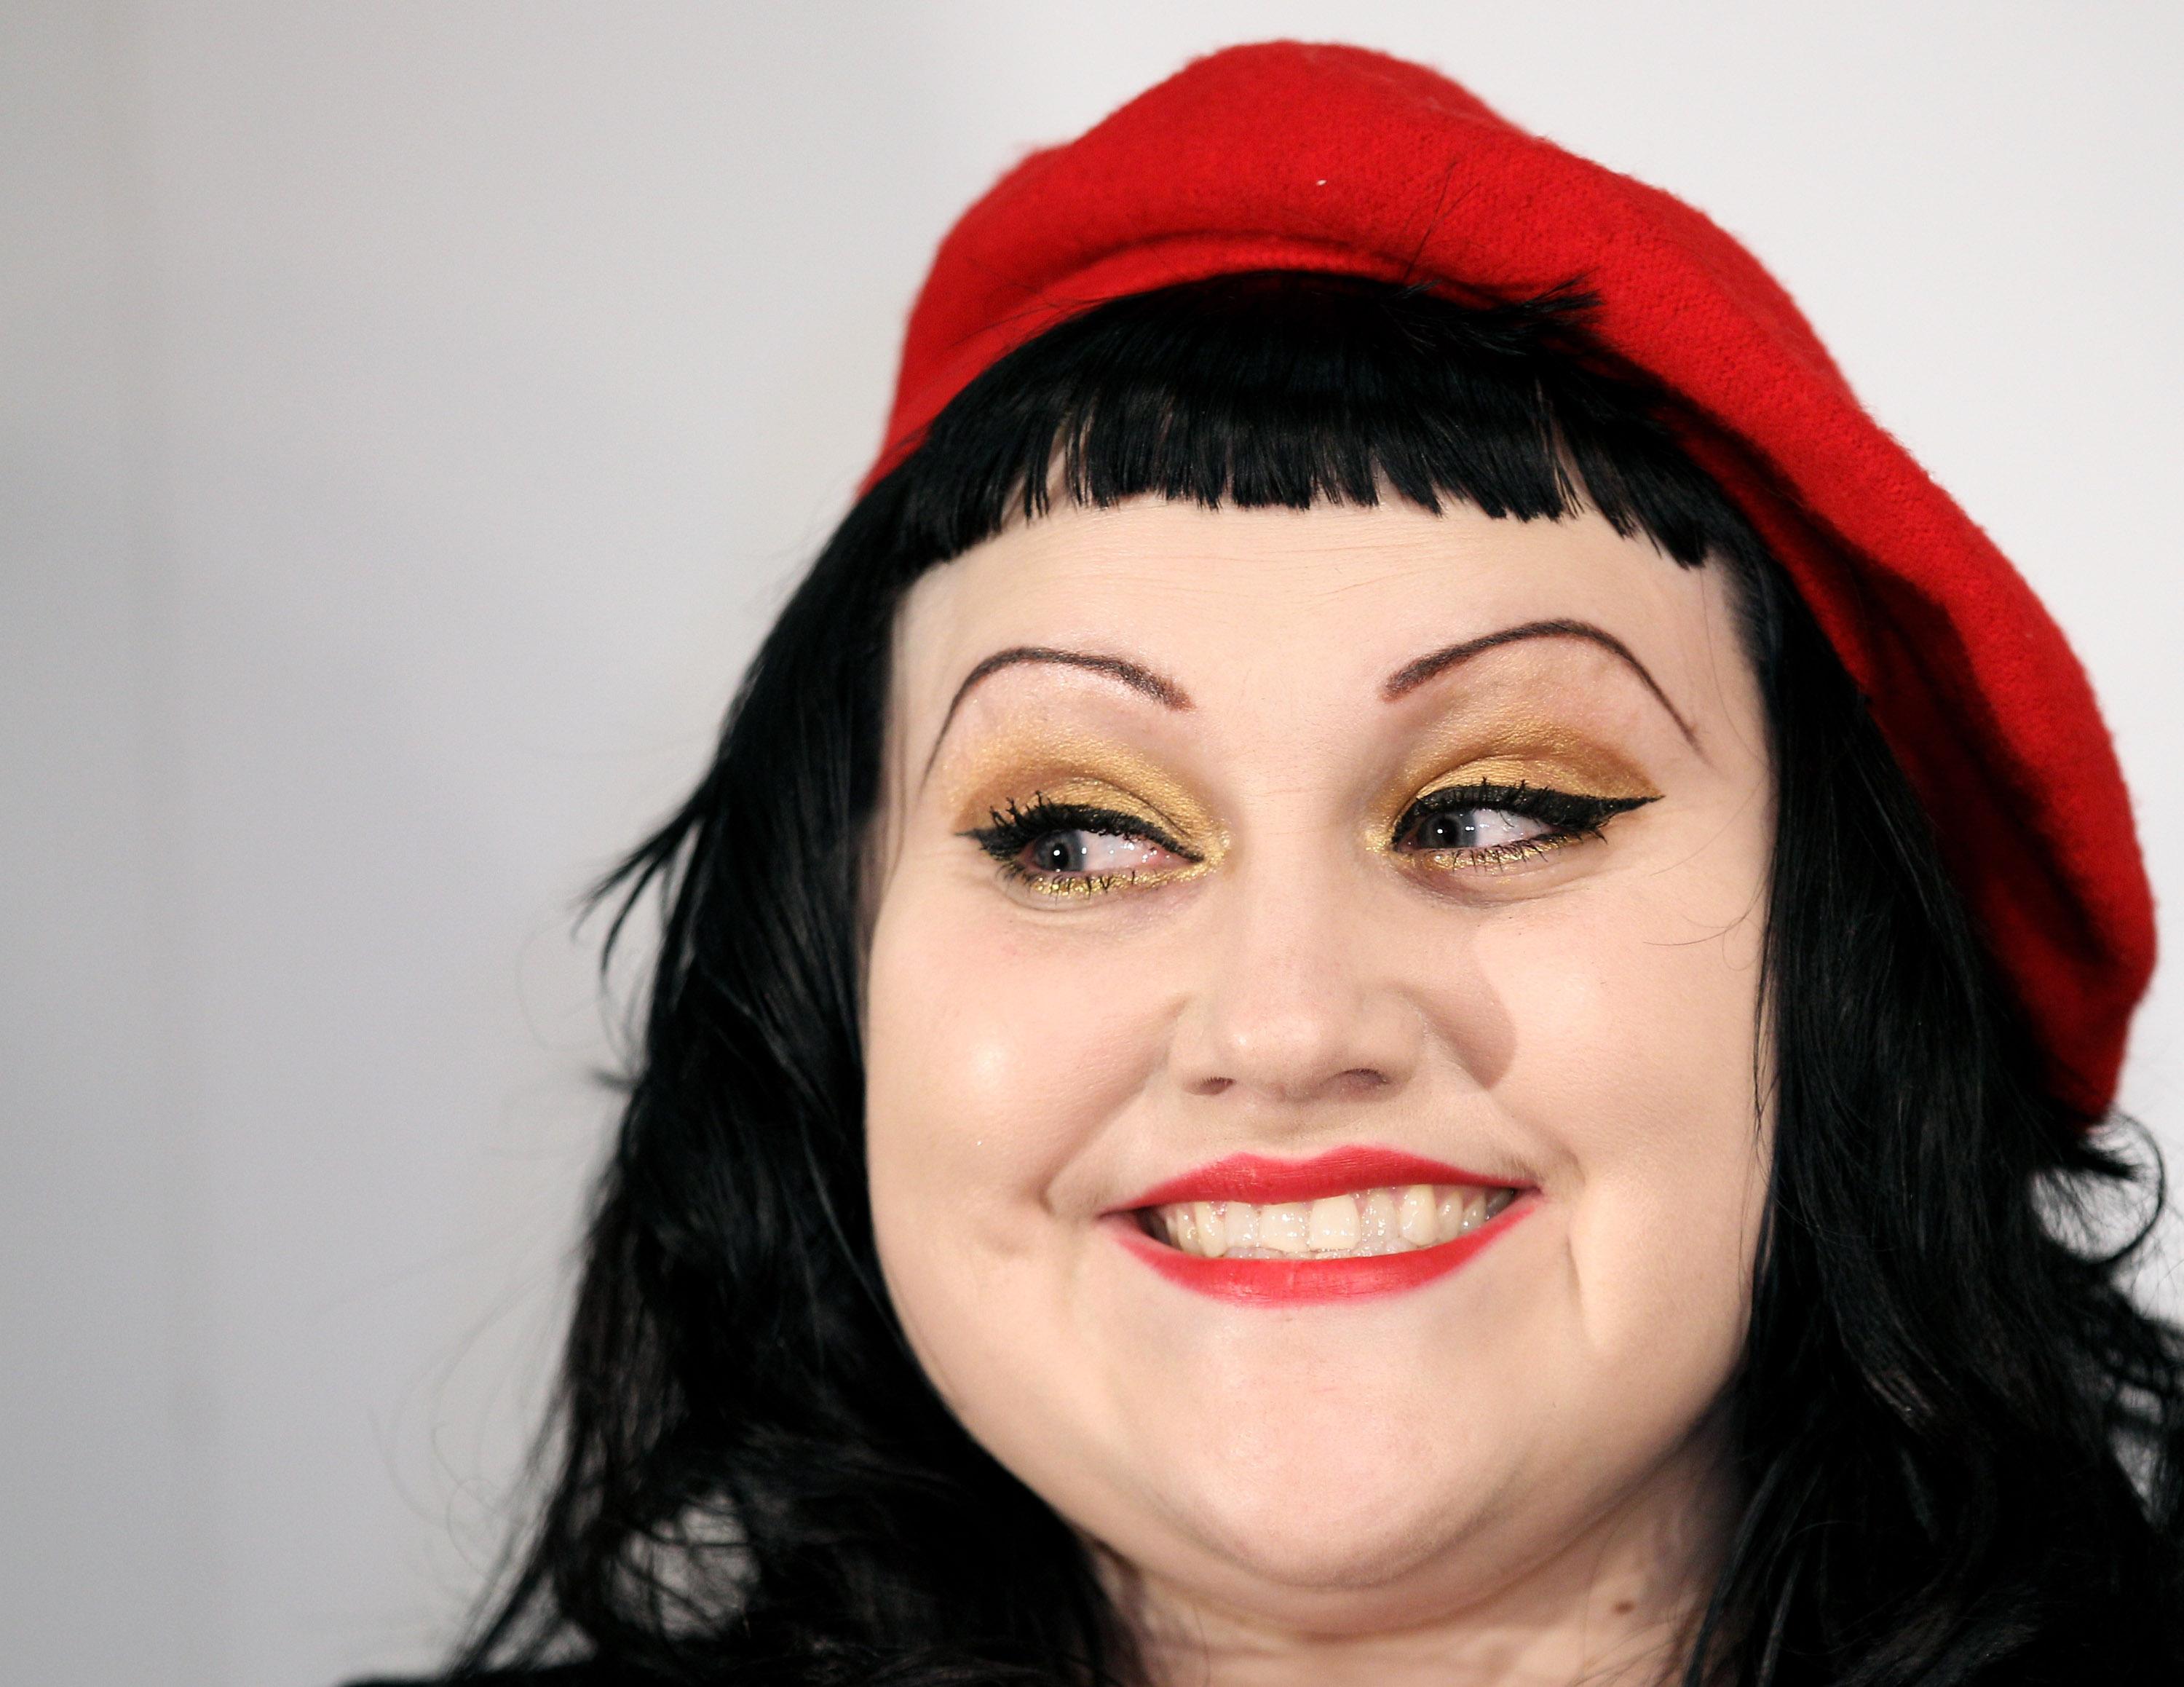 Beth Ditto in 2010